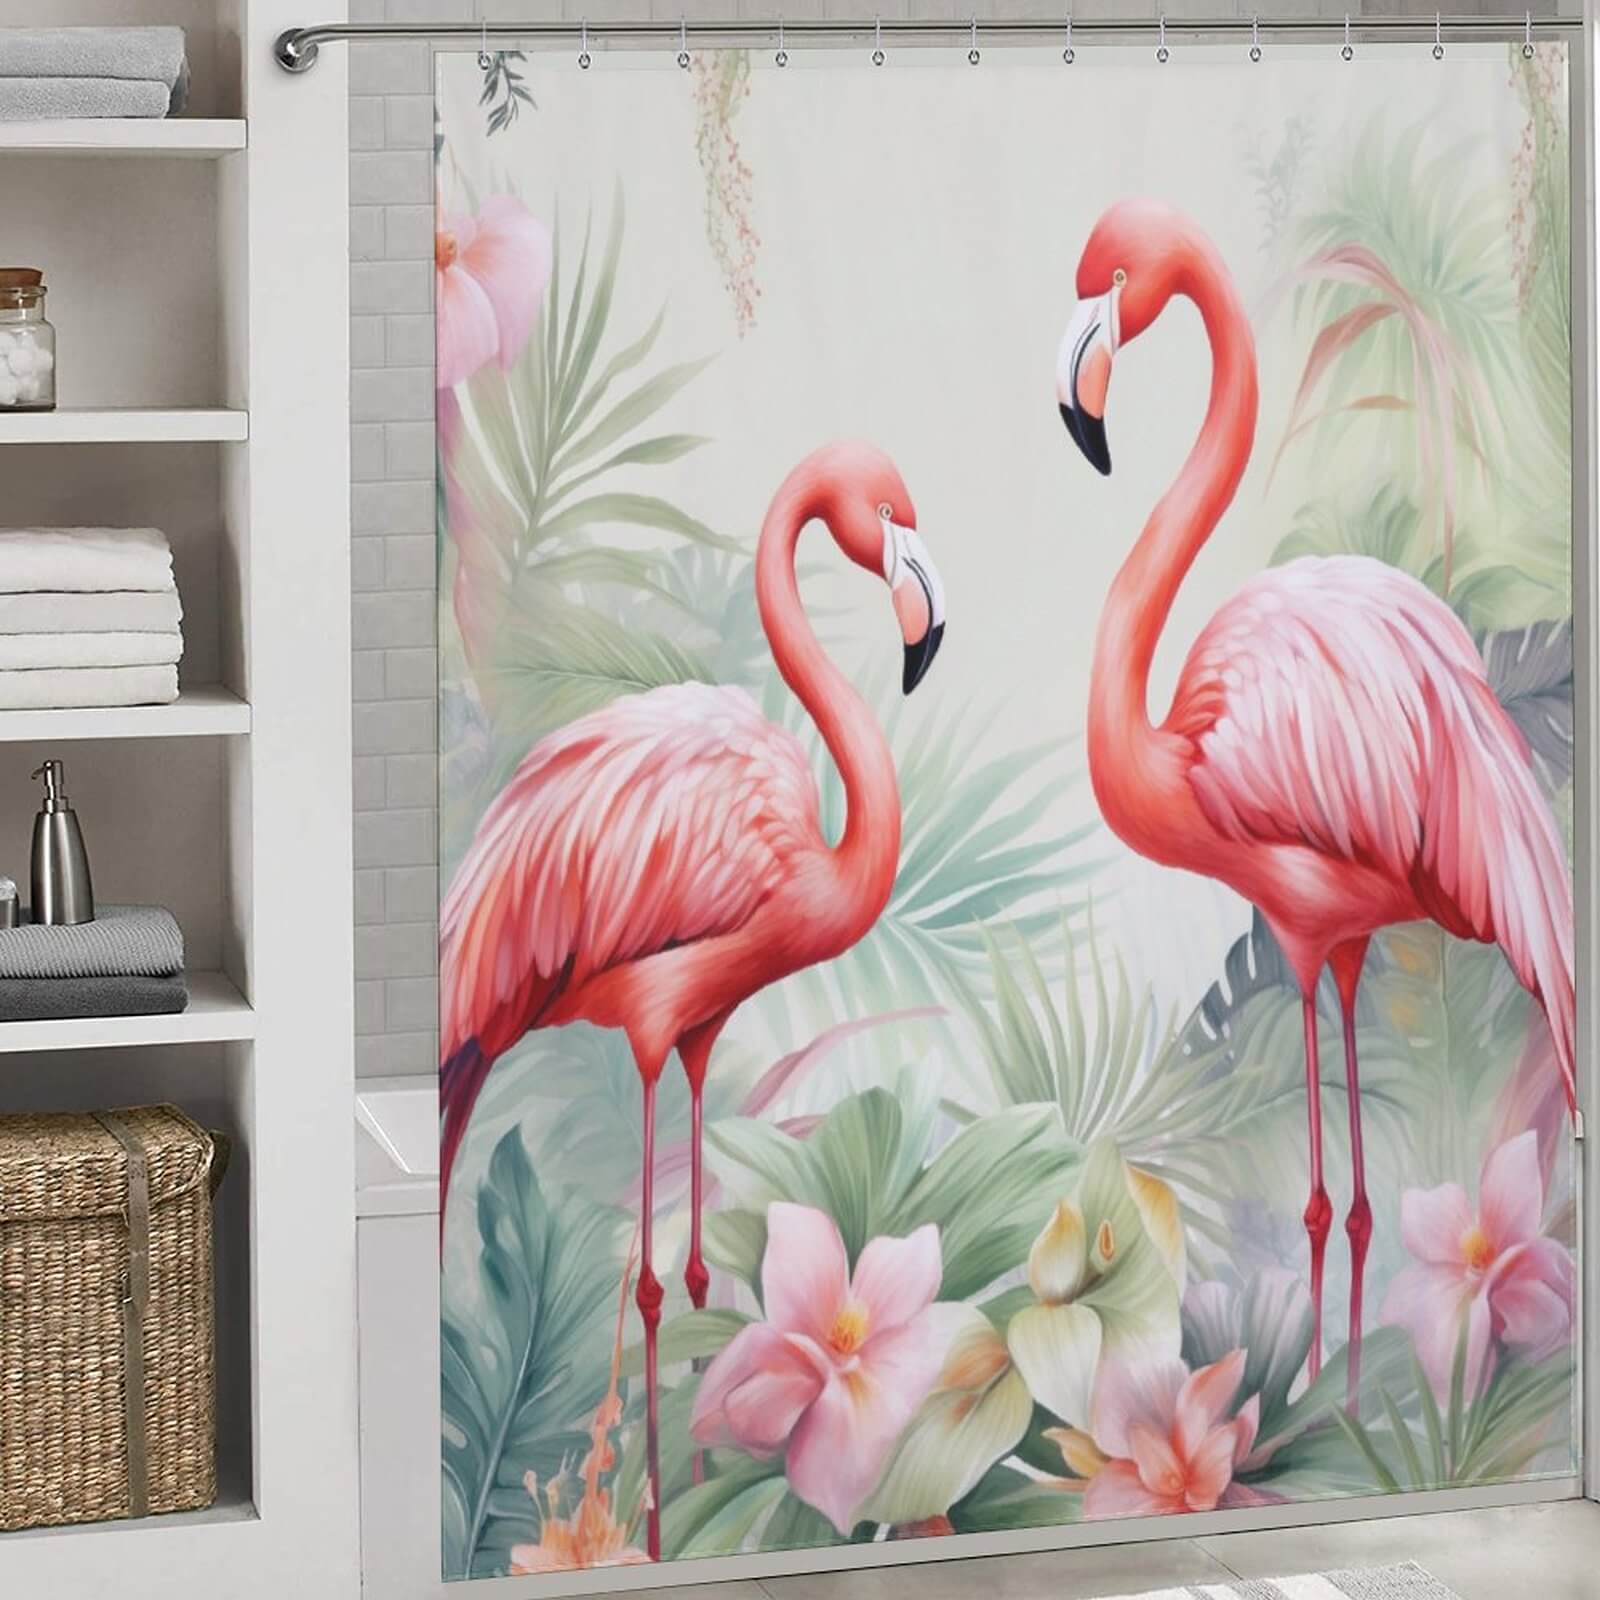 This Tropical Flamingo Shower Curtain by Cotton Cat adds a touch of flair to any bathroom decor with its vibrant pink flamingo design.